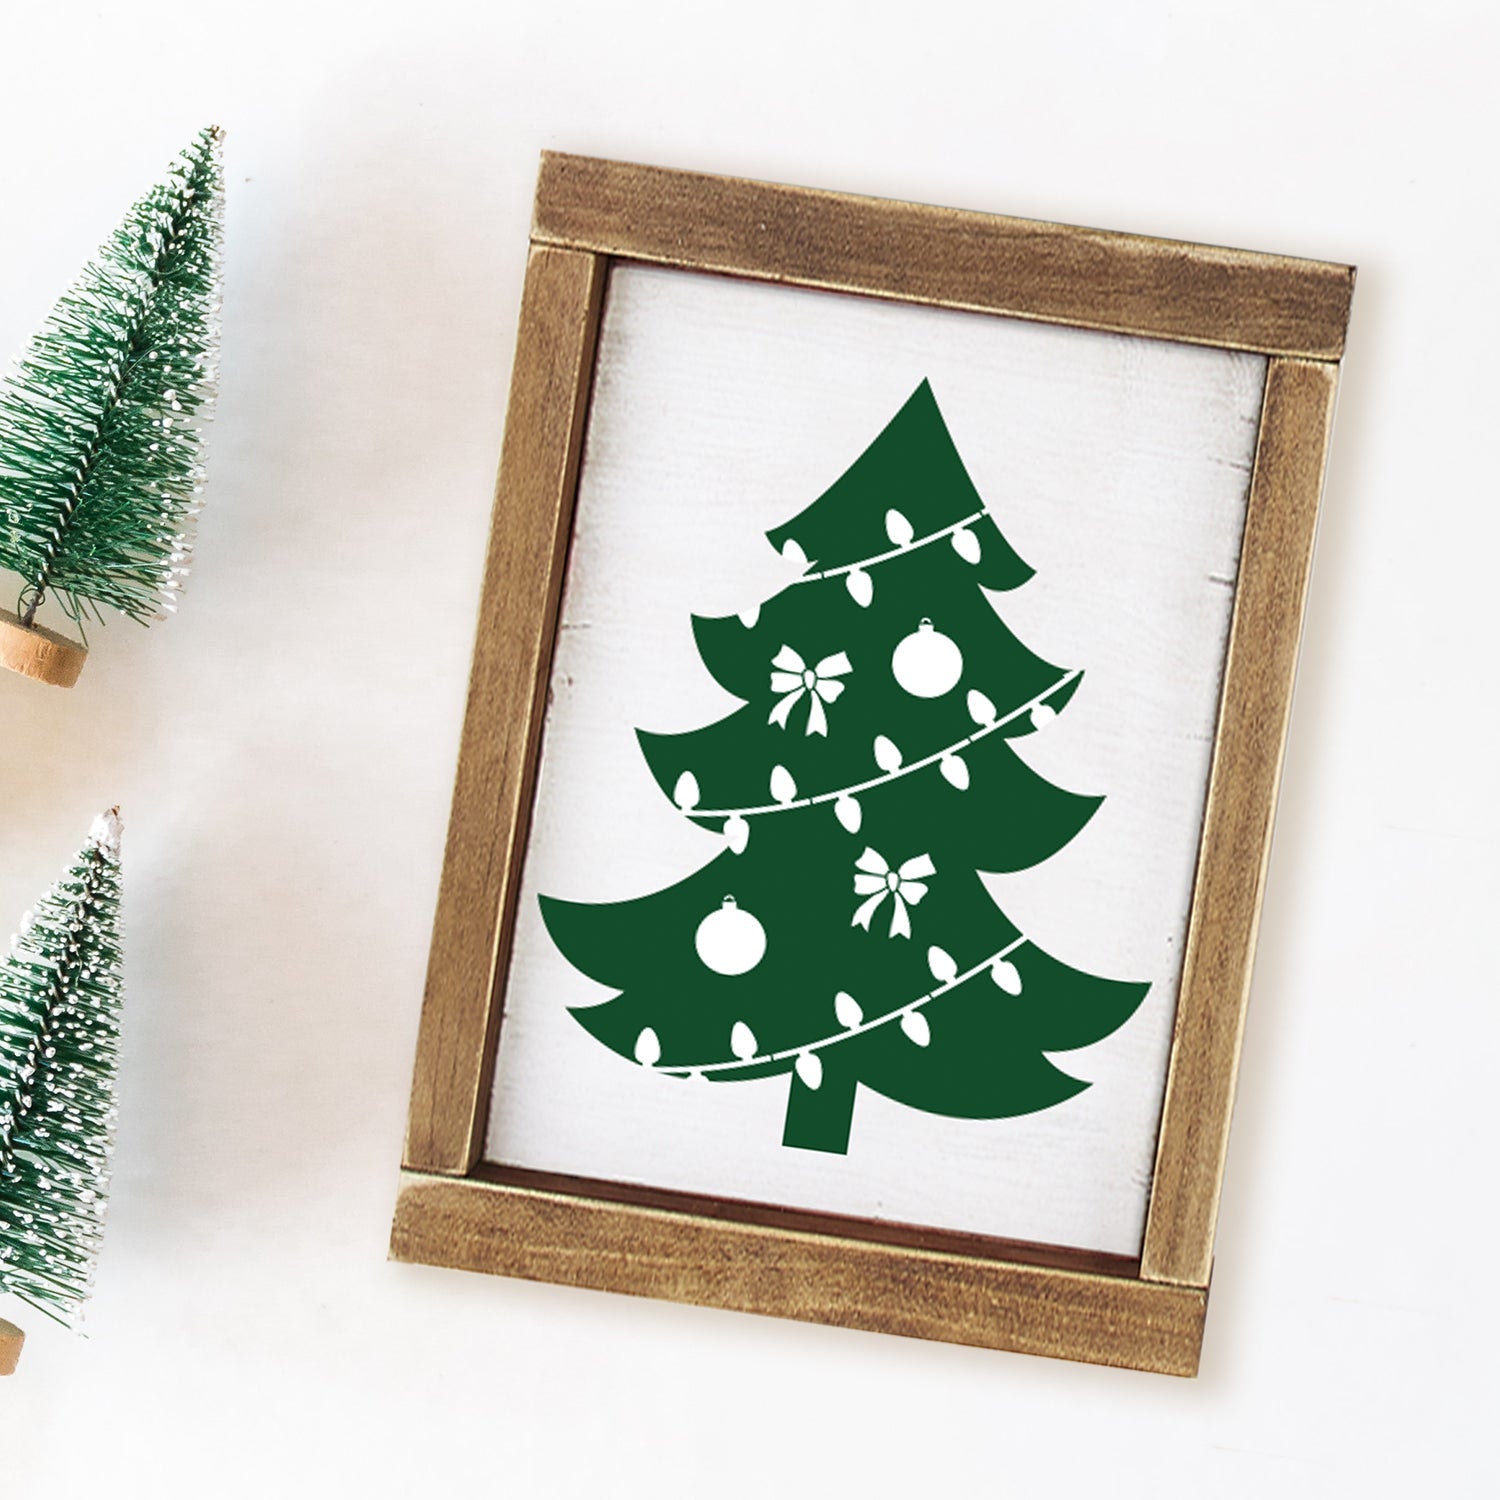 diy decorate a christmas tree layering wood sign stencils, diy christmas crafts, Christmas ornament, bow, angel, dove, candy cane, snowflake, star topper, lights stencils, Christmas tree craft ideas, Christmas tree silhouette stencil